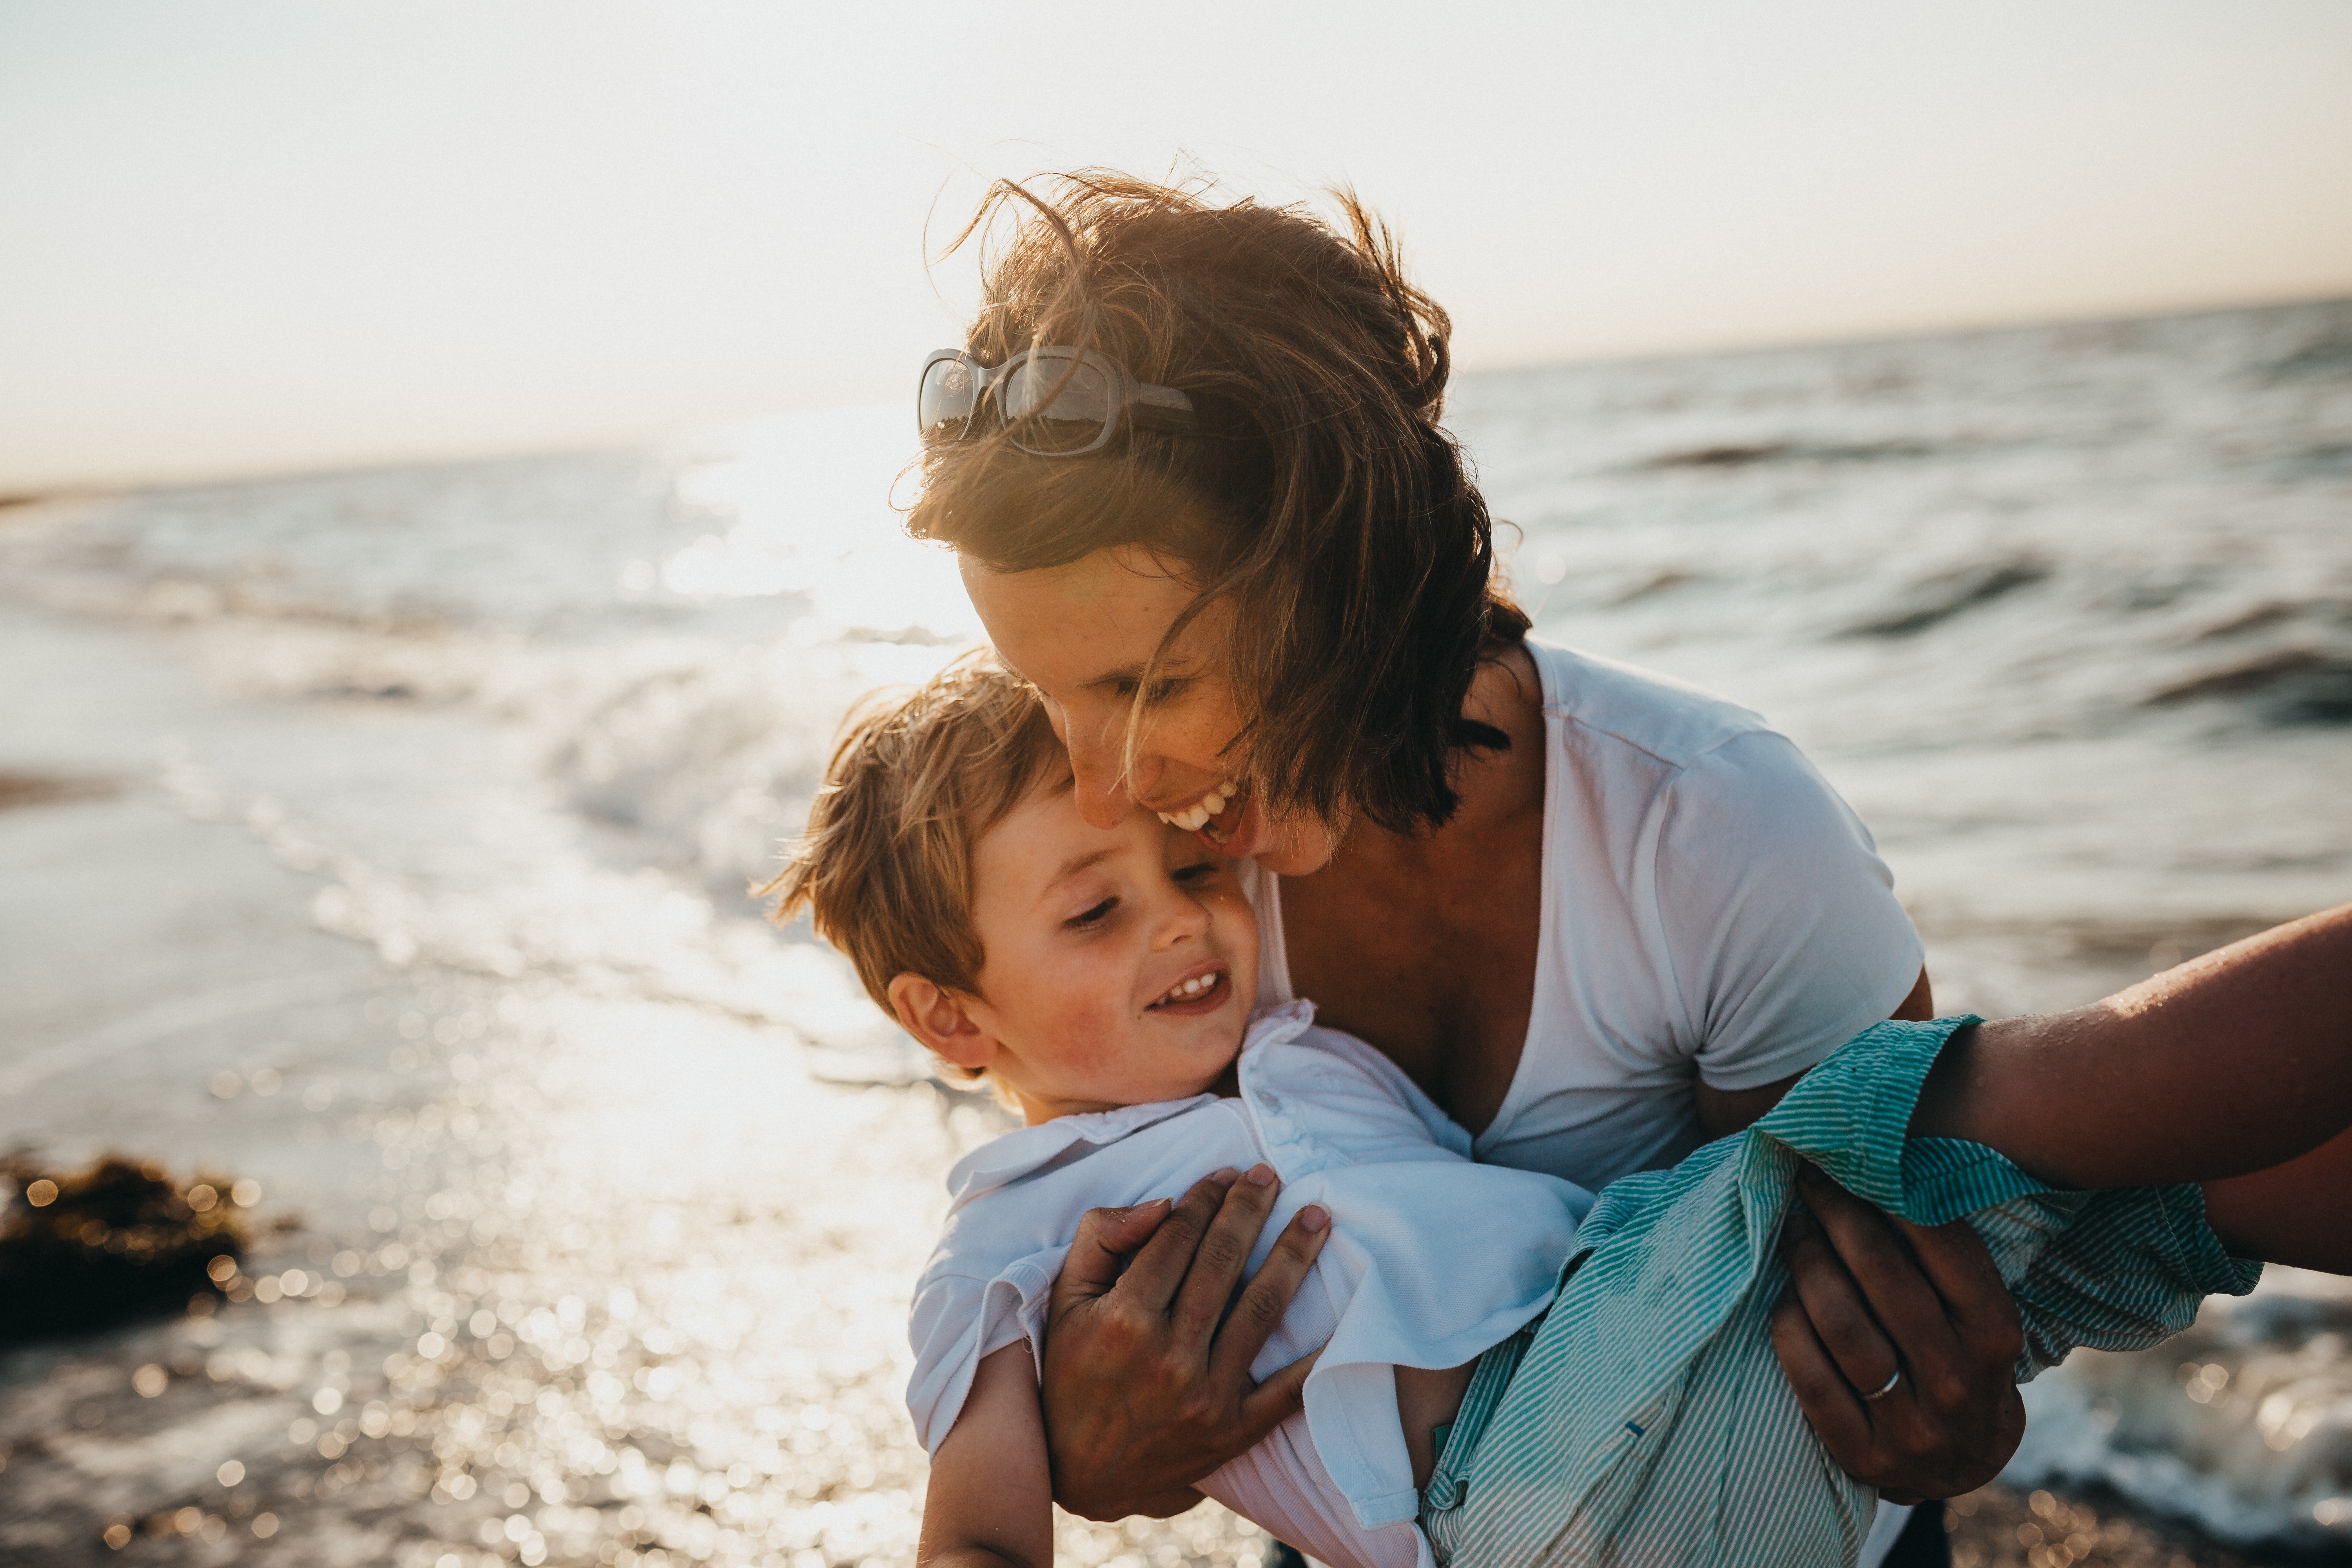 Susan raised her son alone after she was widowed. | Source: Unsplash